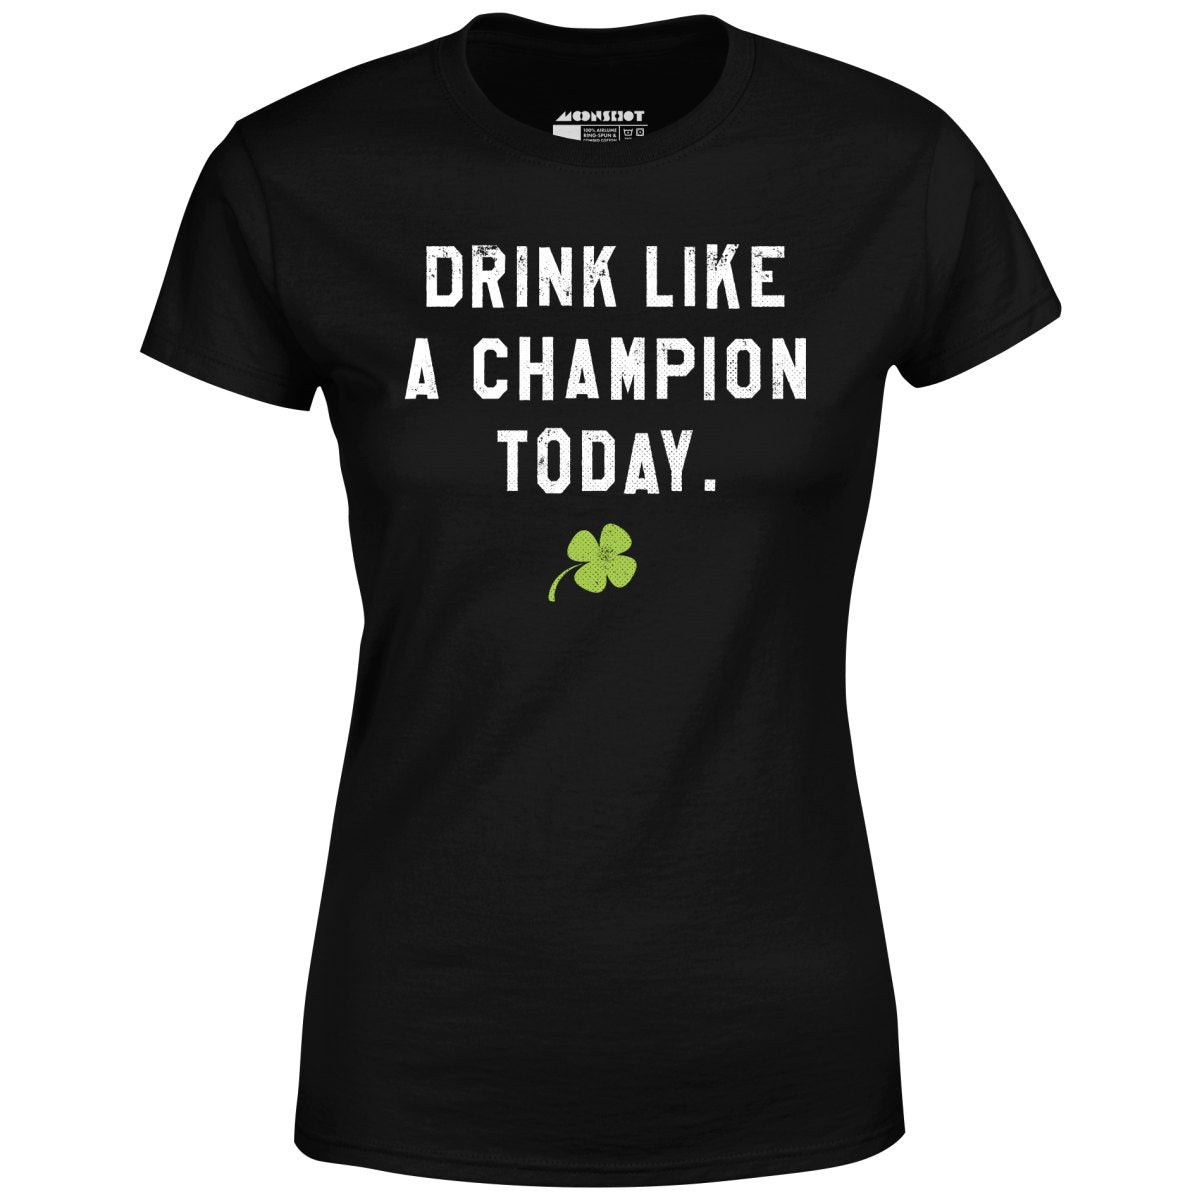 Drink Like a Champion Today - Women's T-Shirt